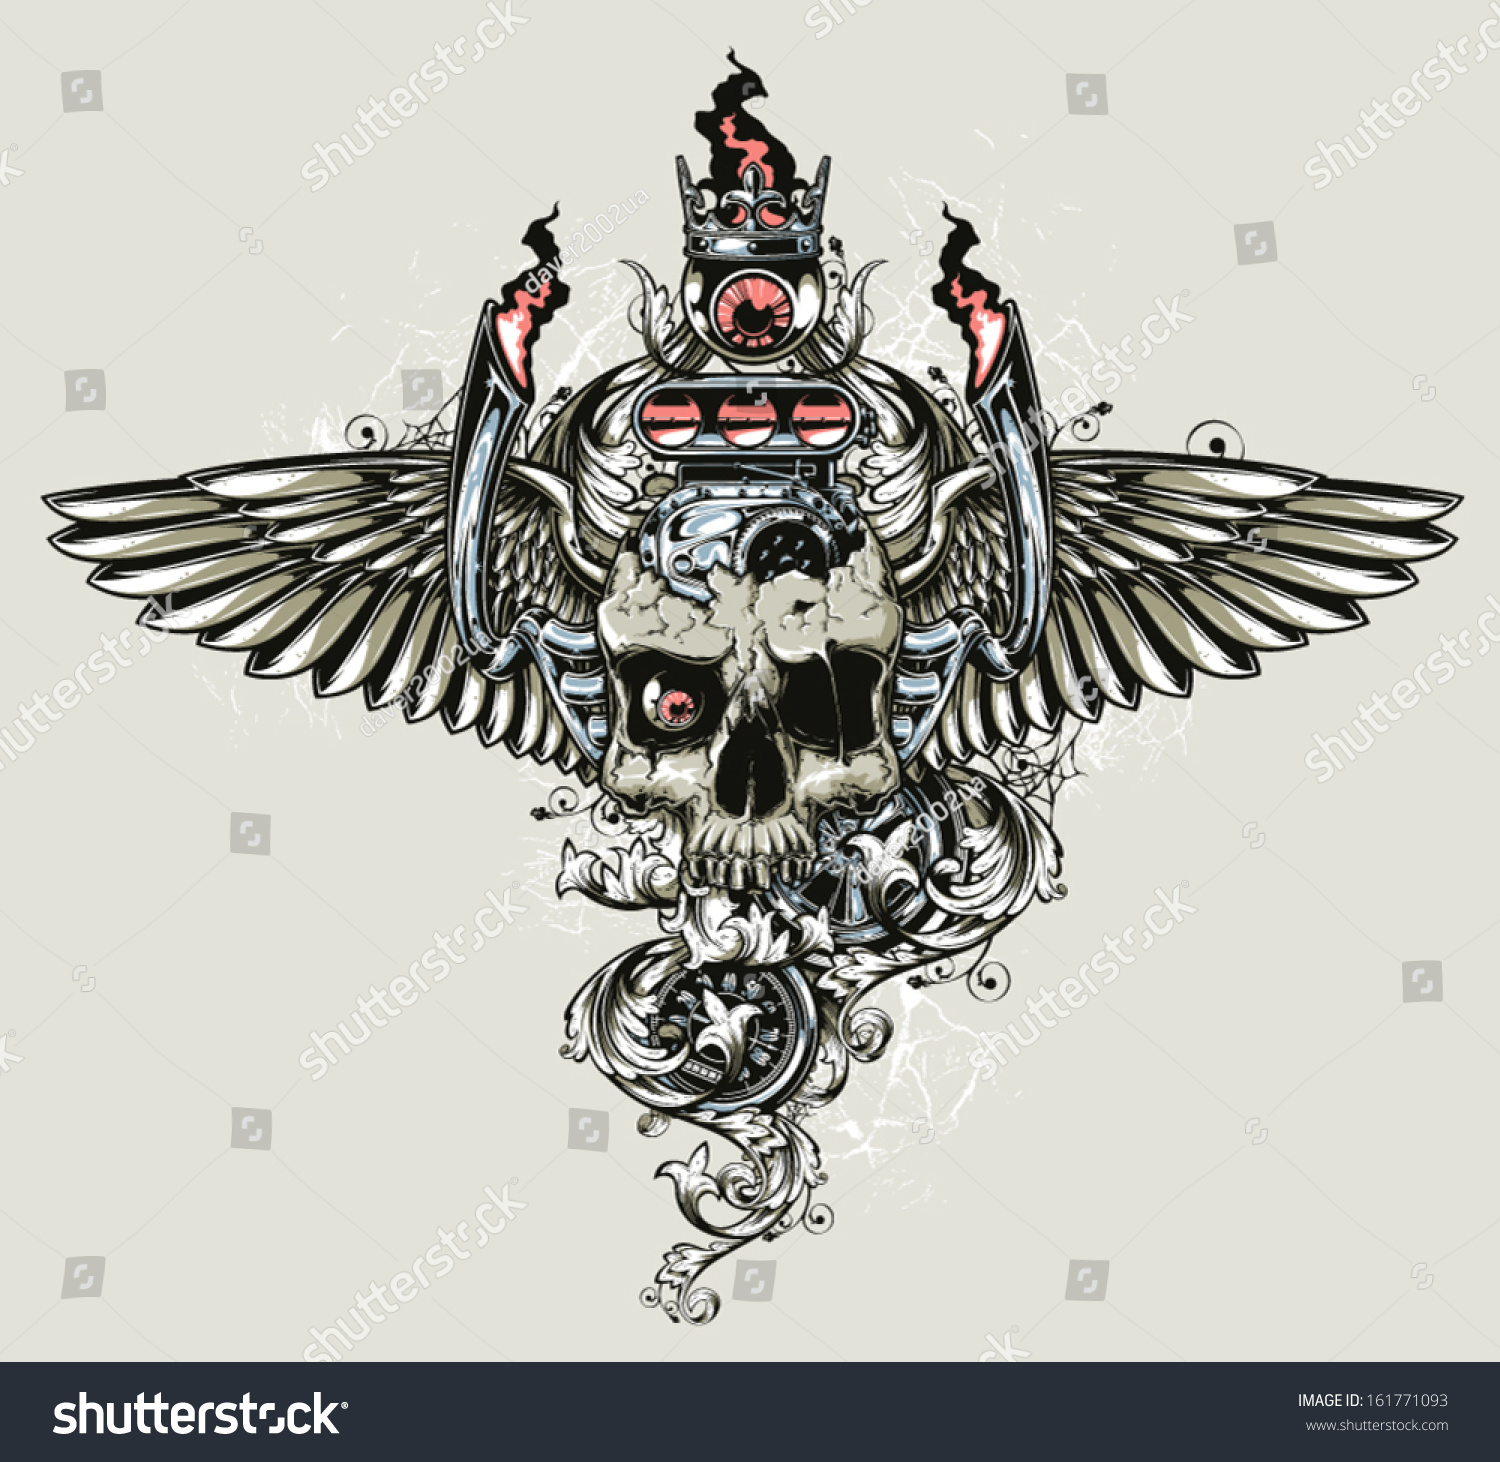 SVG of Winged skull with dragster engine svg